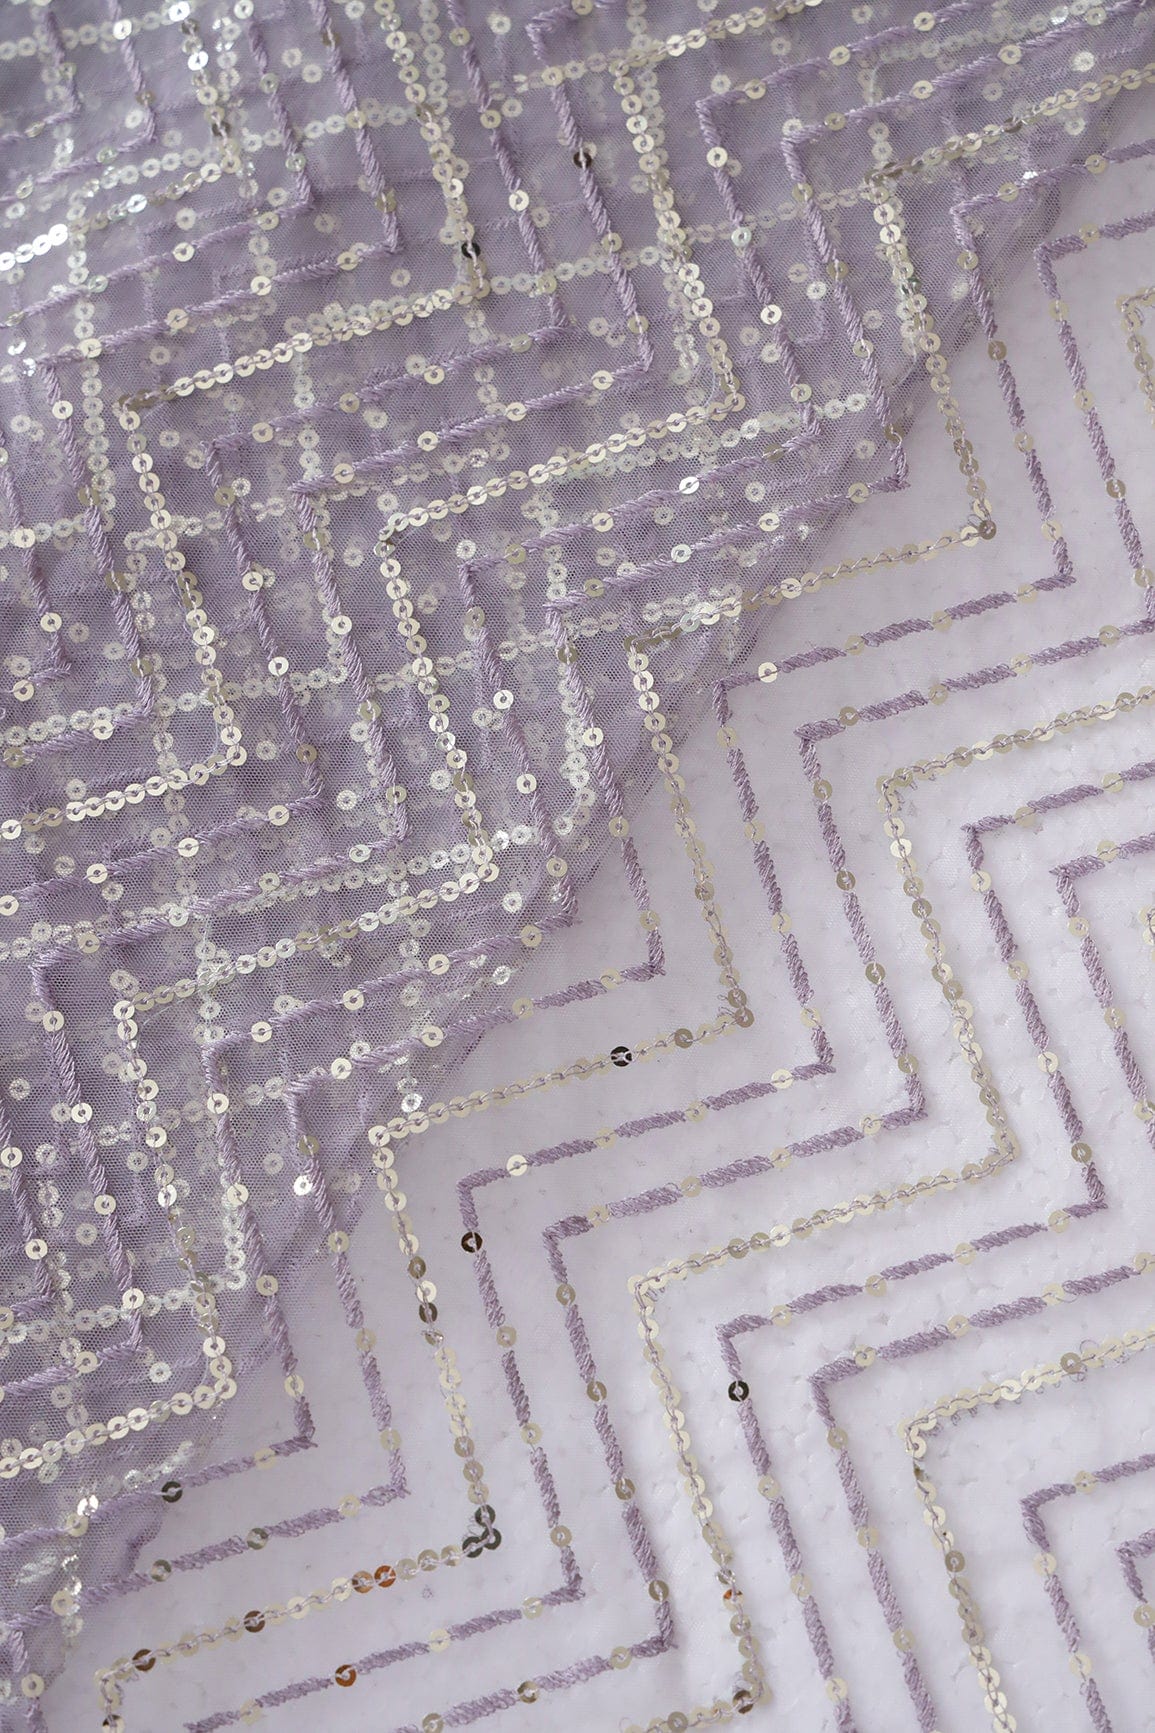 doeraa Embroidery Fabrics 2 Meter Cut Piece Of Gold Sequins With Lavender Thread Chevron Embroidery Work On Lavender Soft Net Fabric